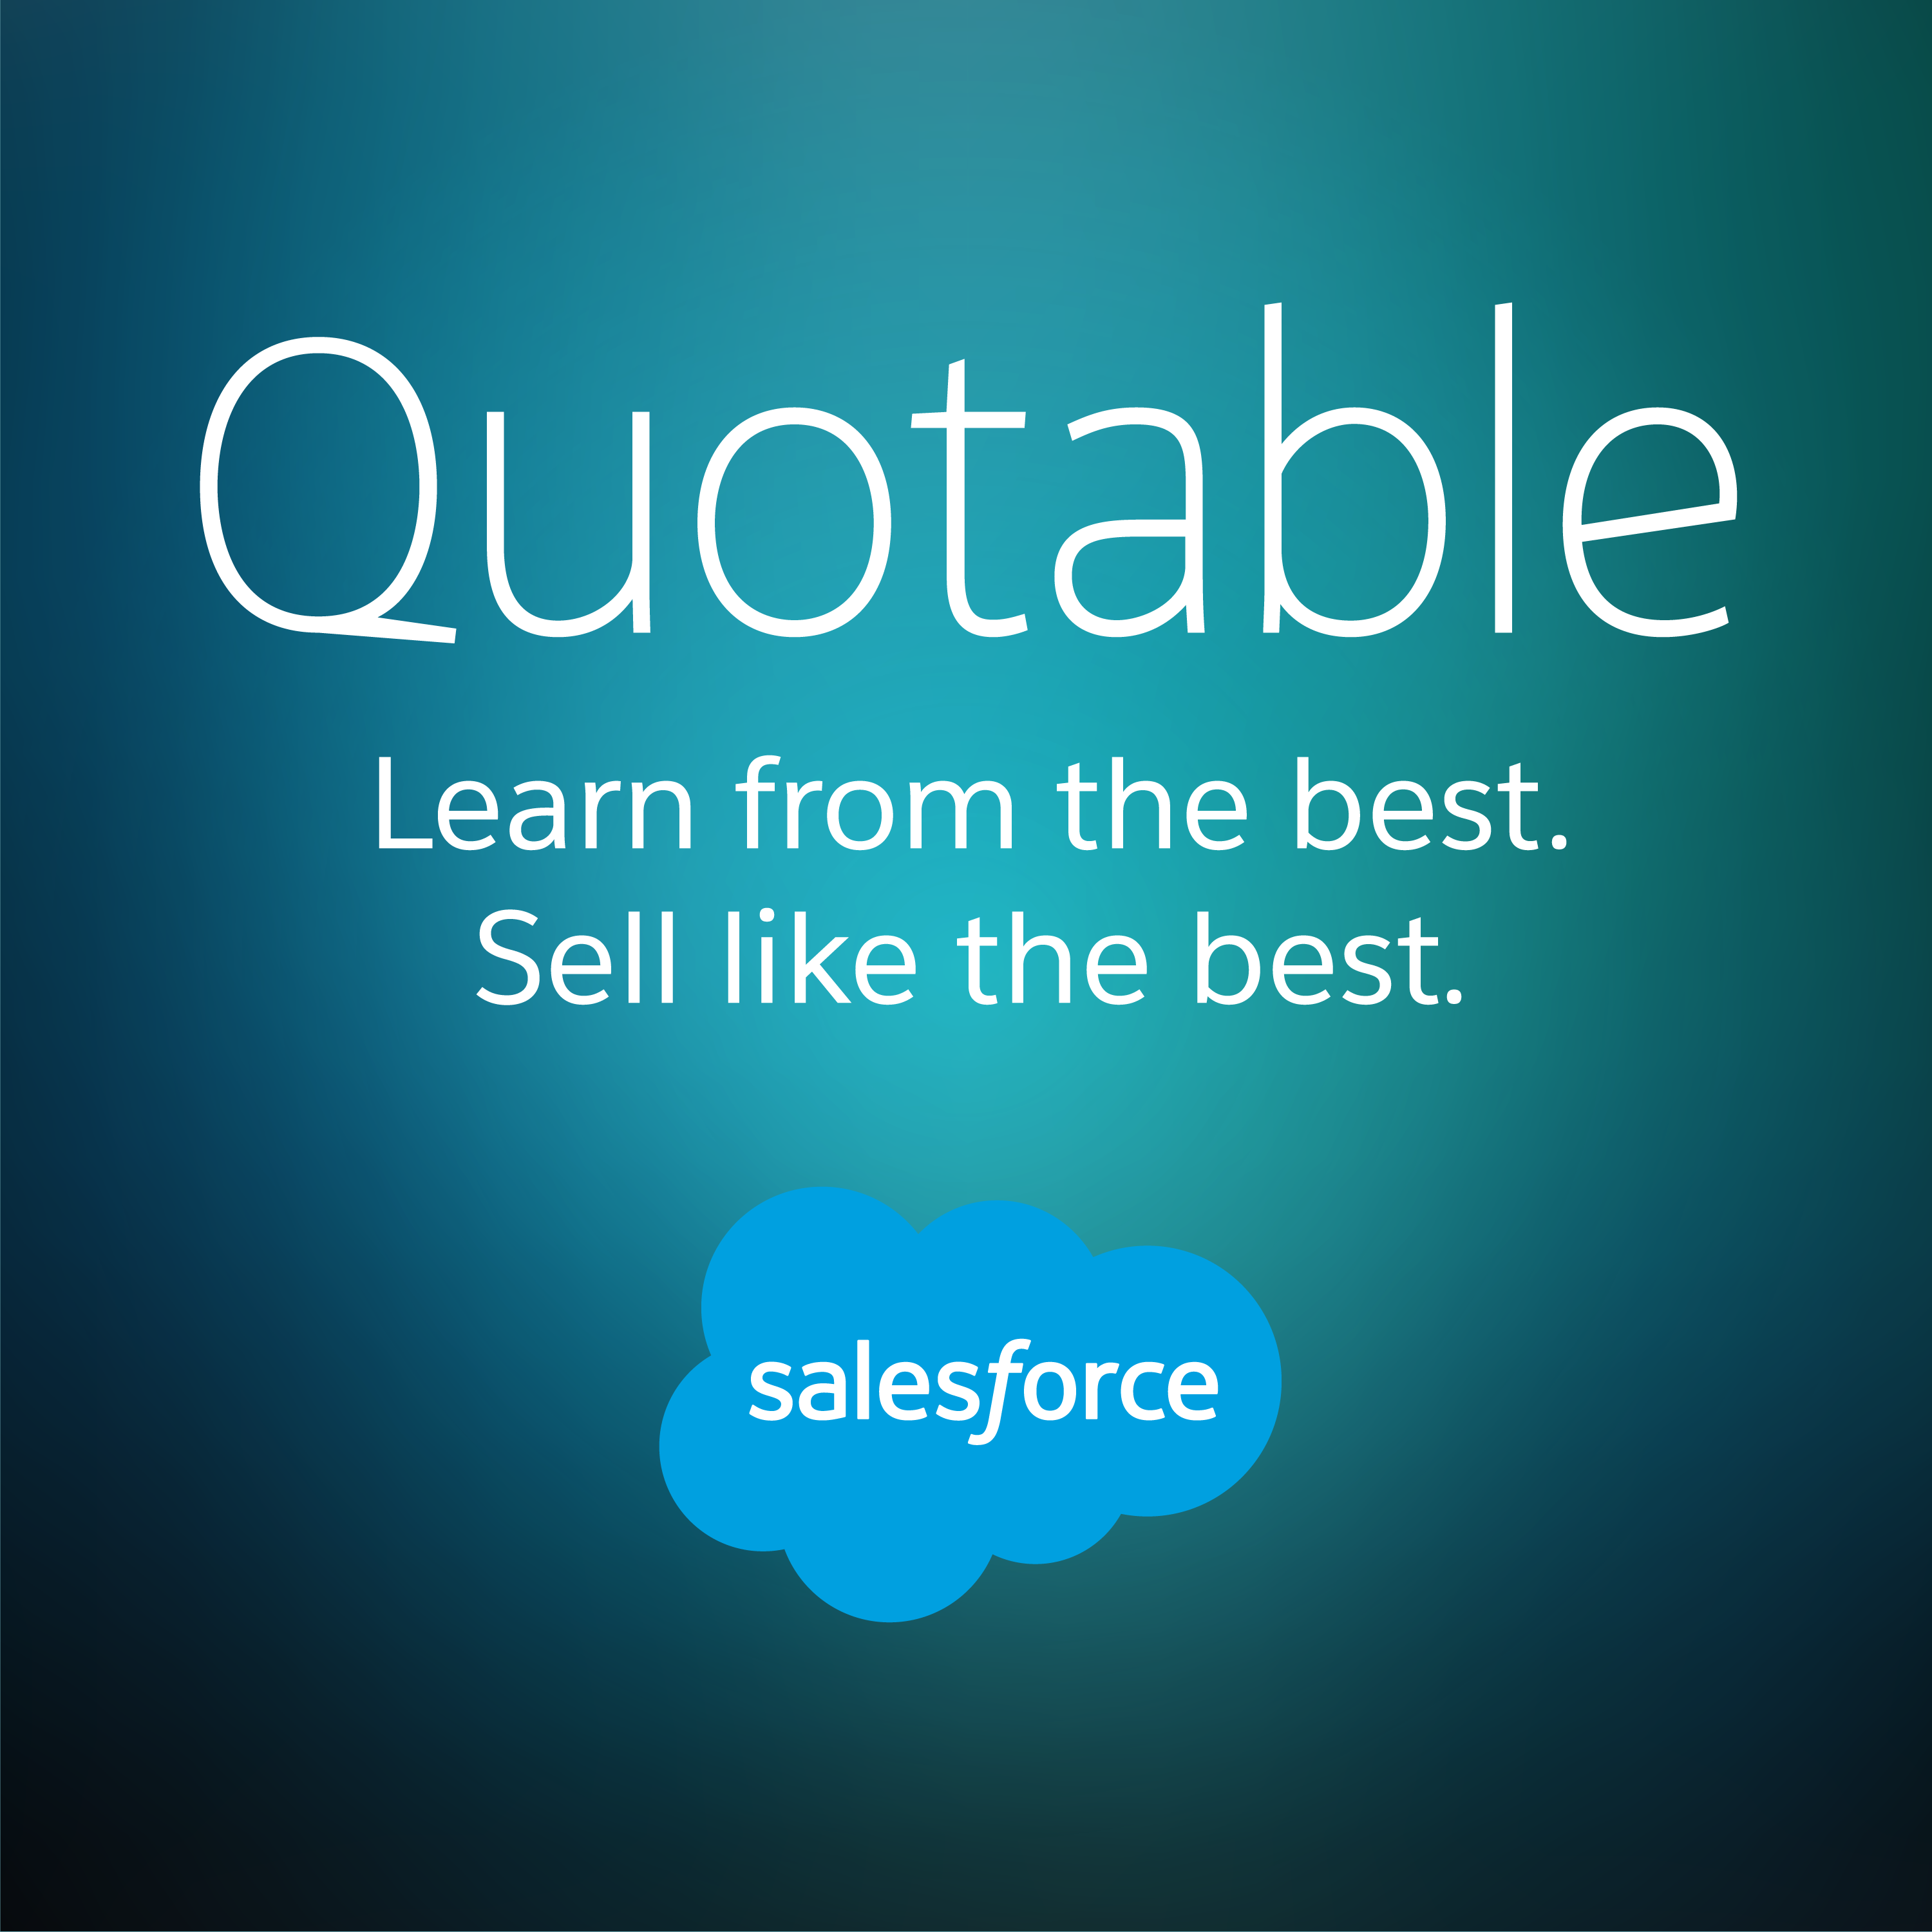 Quotable Podcast Episode #149: How to Use Inside Sales to Drive Growth, with Ben Vonwiller and Maria Valdivieso de Uster